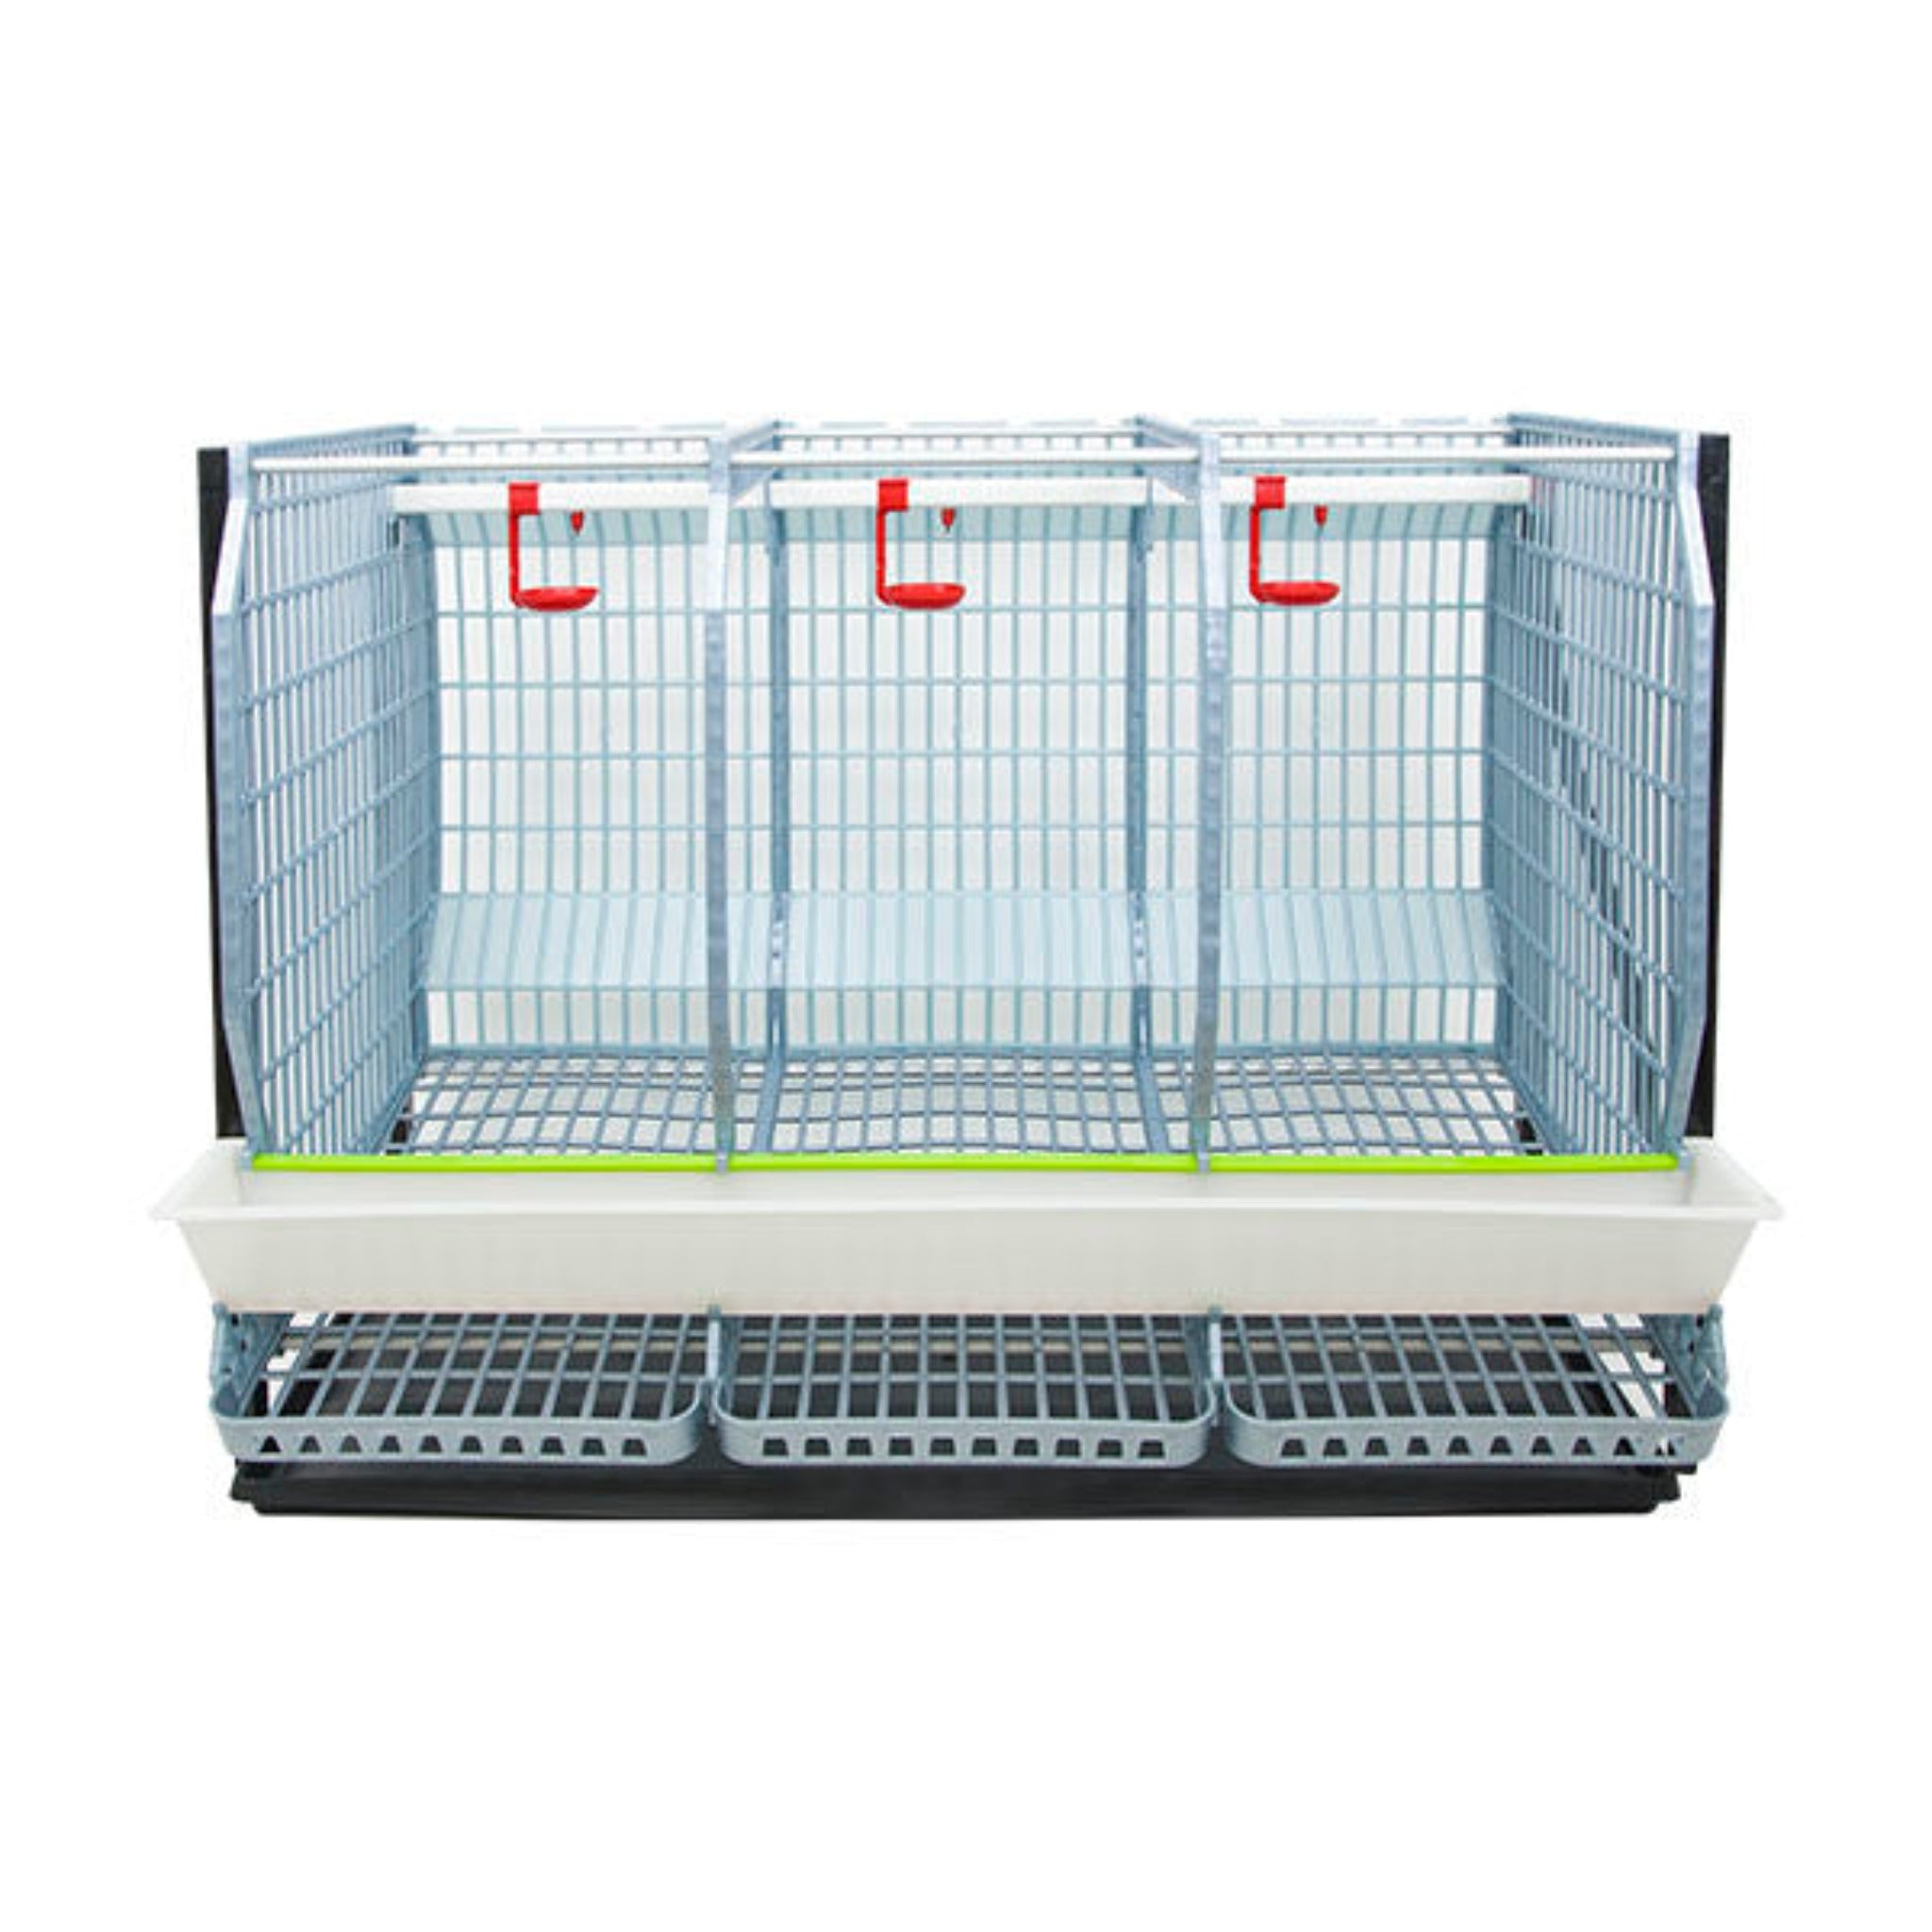 Hatching Time Cimuka. TYK60 22” Chicken cage 2 layer. Image shows chicken cage from front. Roof and front walls are removed to show inside of cage. Roll out egg trays can be seen on front under feeding trough. Automatic drinker system is seen on back wall of cage.